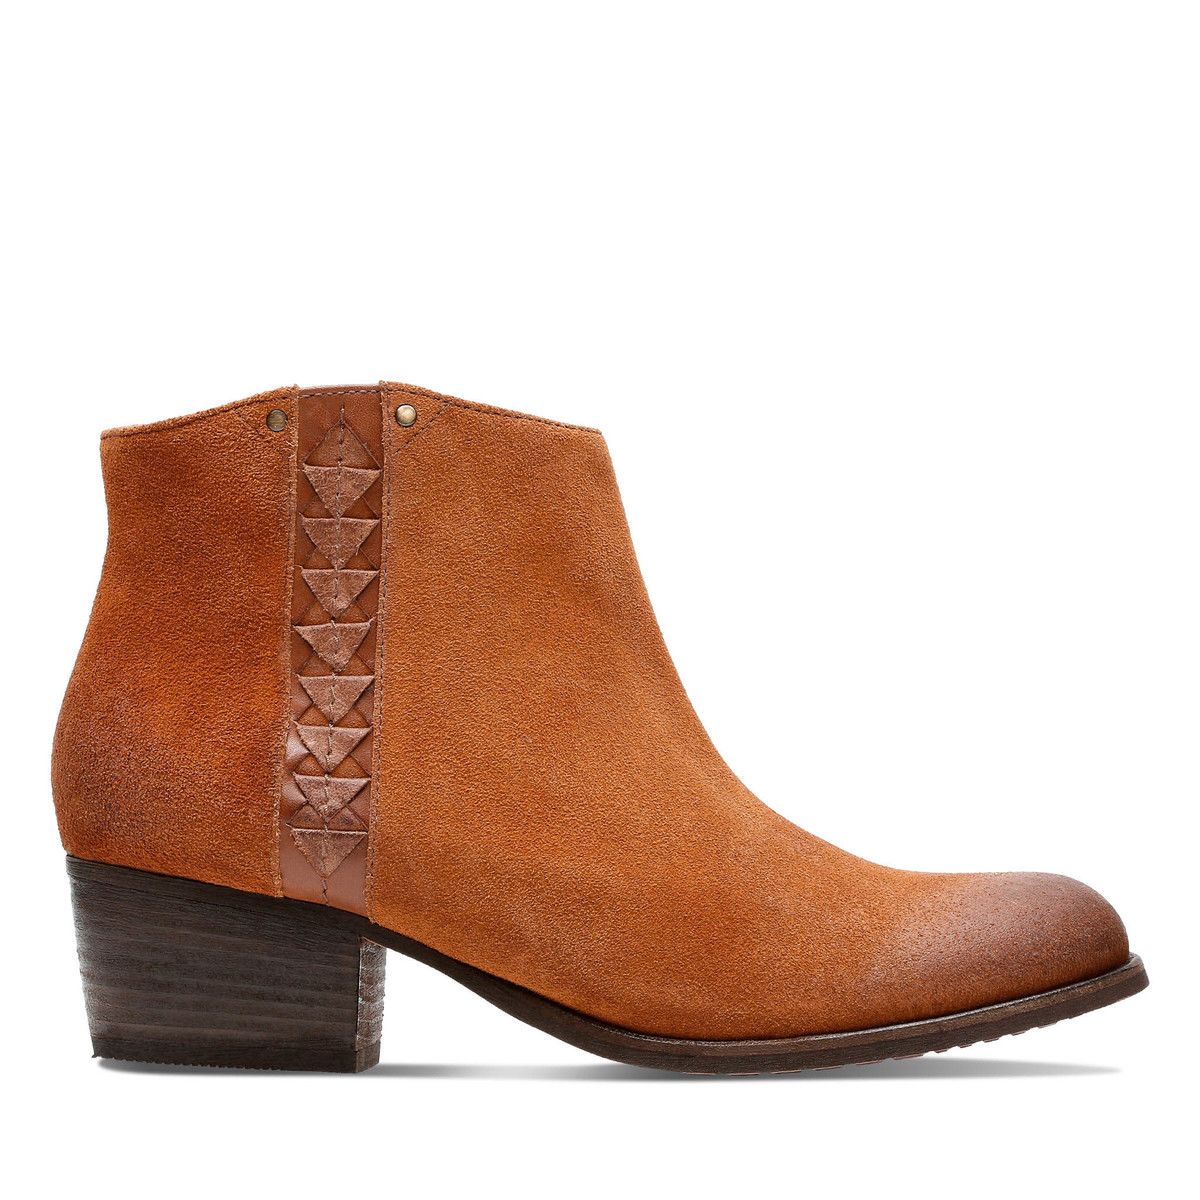 clarks maypearl fawn ankle boot Cheaper 